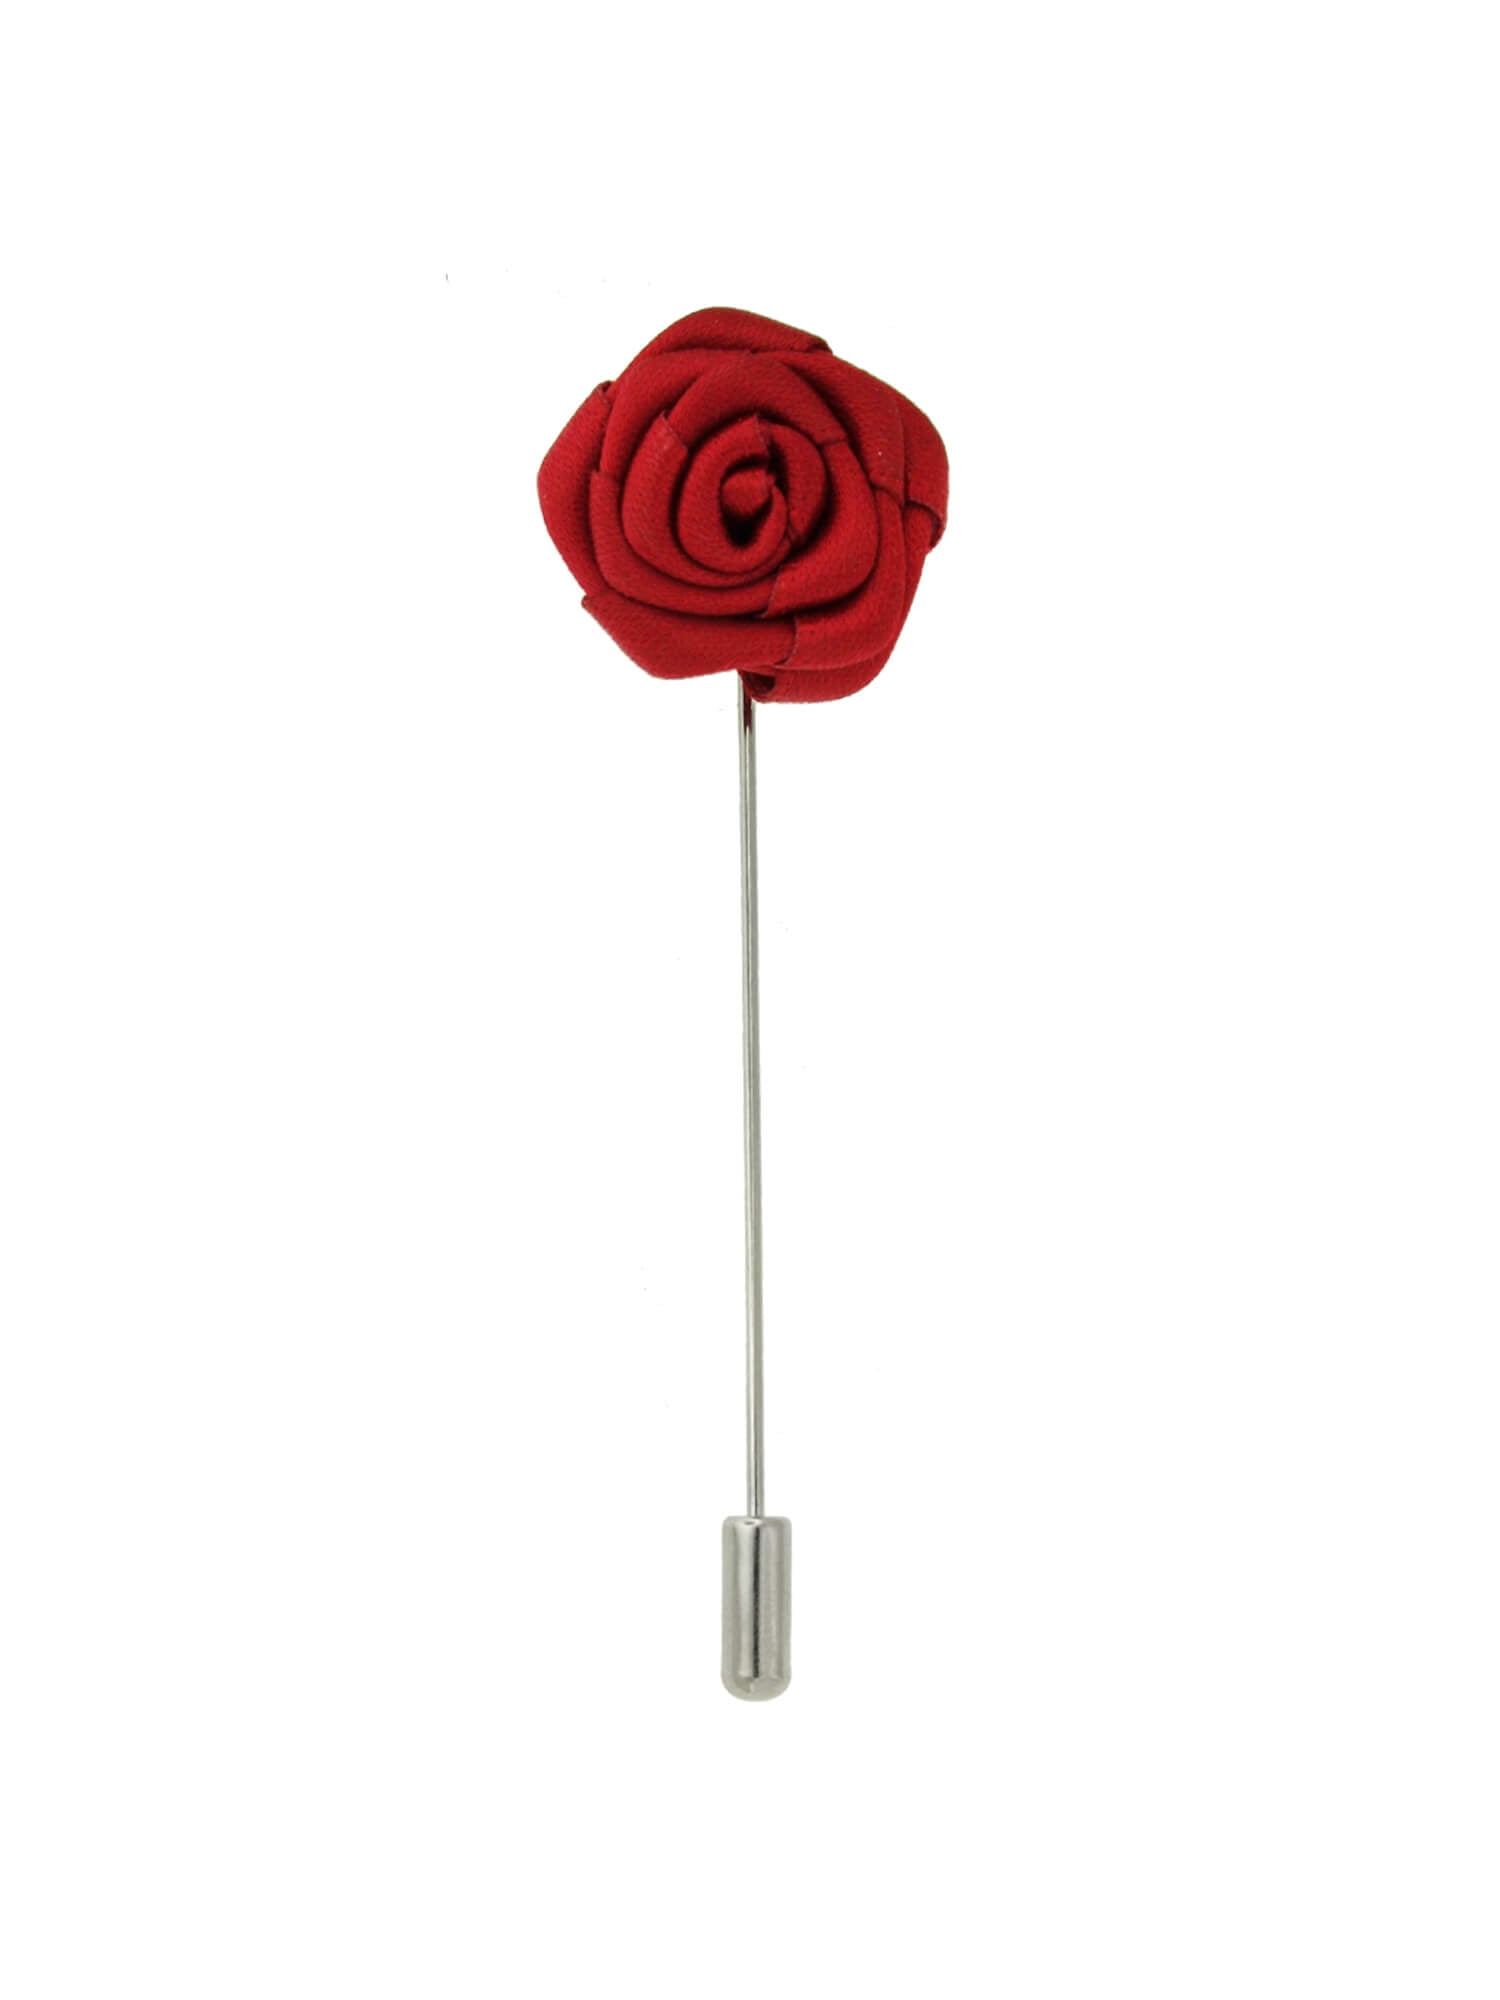 Flower Stick Pin - Cloth Textured | Red/Black | Flower Pins by PinMart